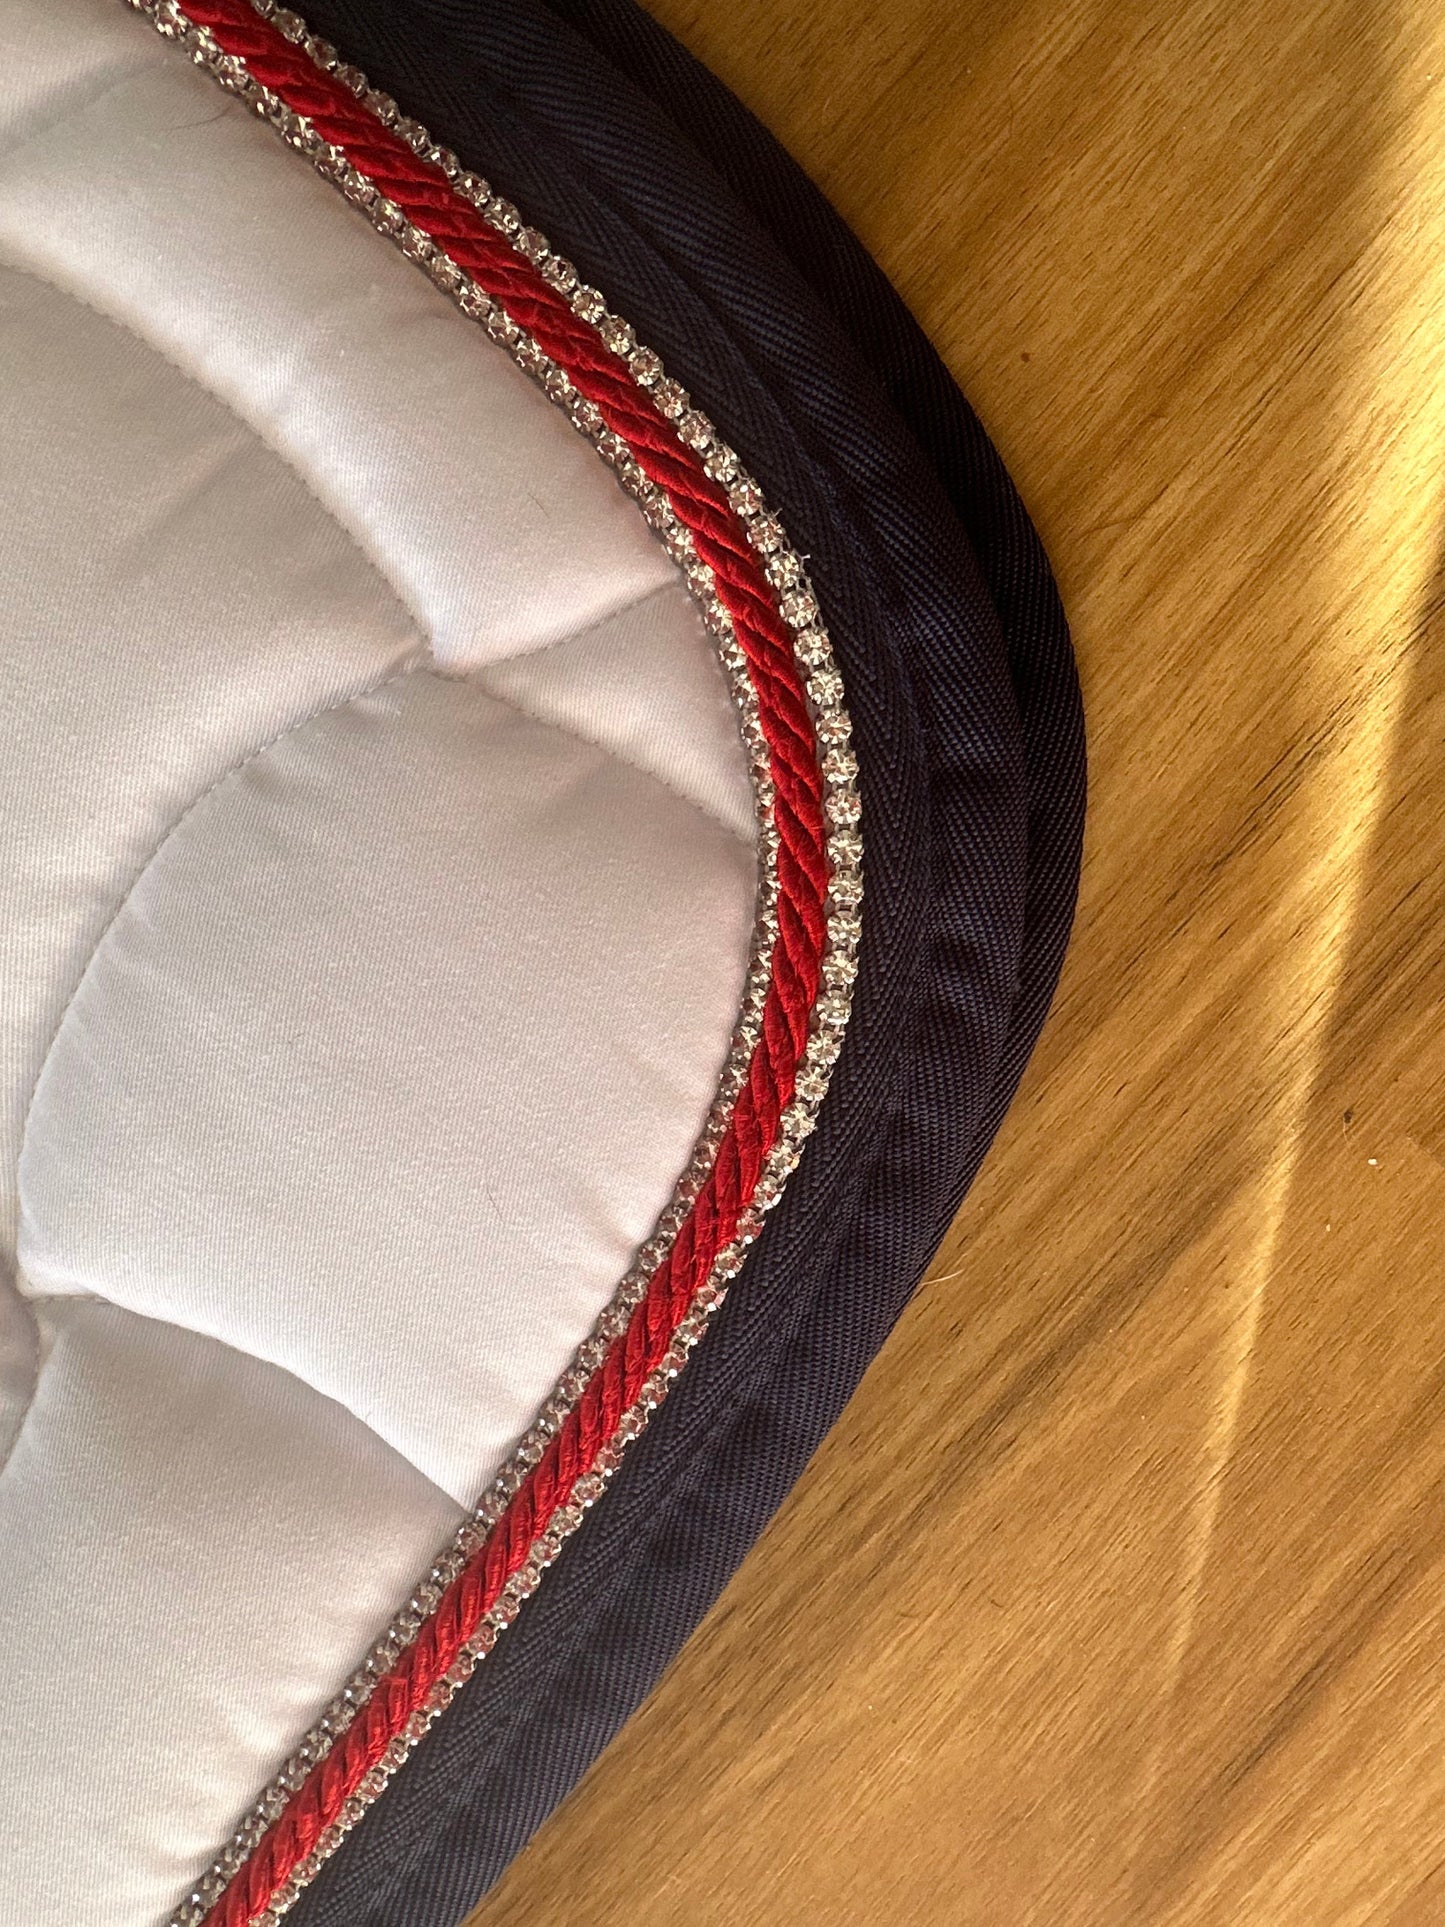 Alt text: Close-up Anna Scarpati saddle pad with red and crystal trim.